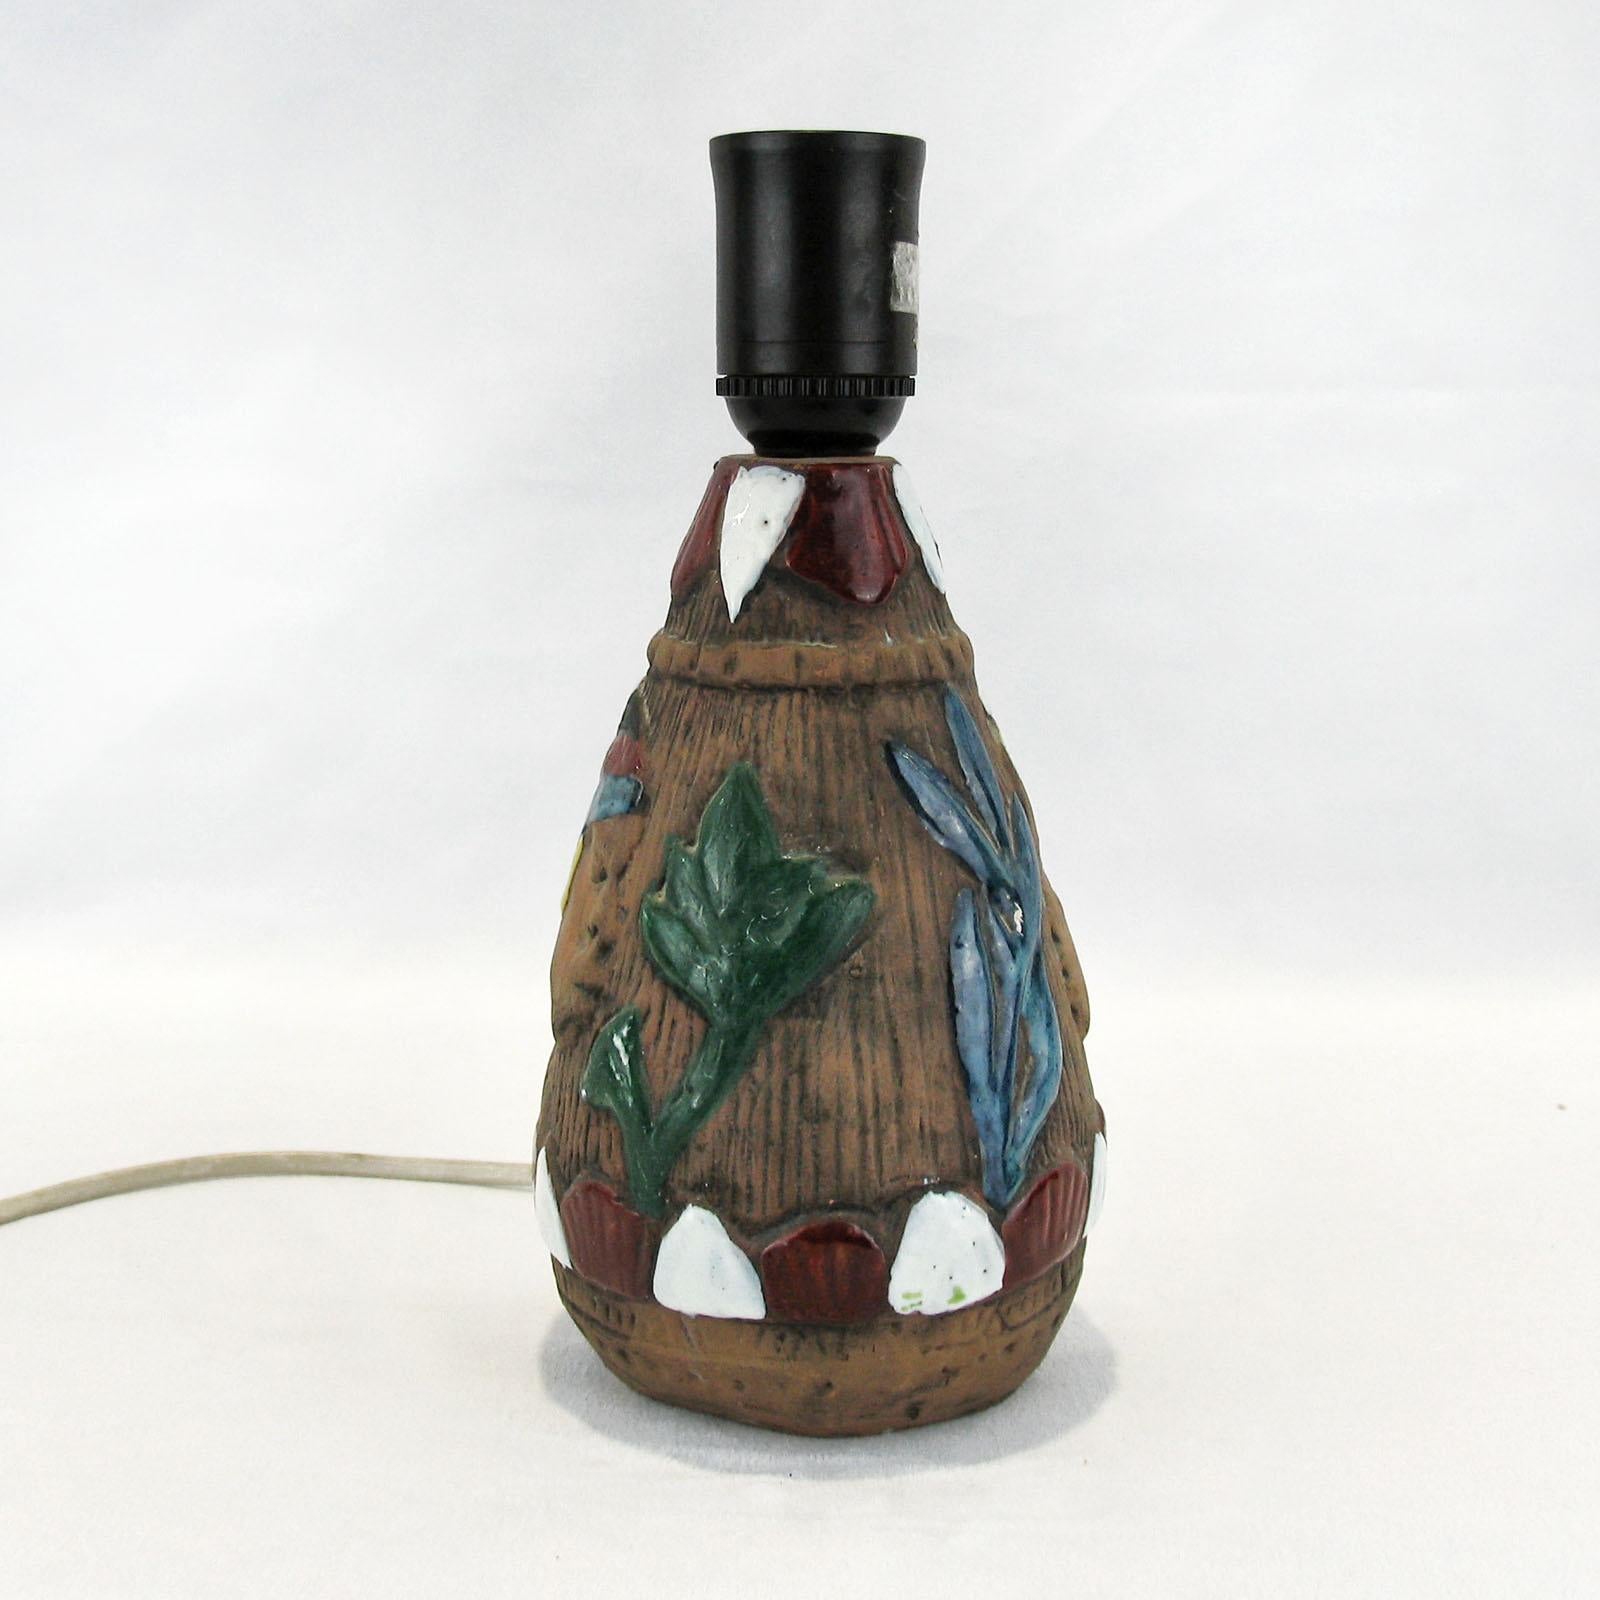 Exceptional earthenware table lamp made by Tilgmans Keramik, Sweden, early 1950s. Foot lamp decorated with an African couple, a boy and a girl, face to face, realized in sgraffito technique, details enhanced with colored over-glaze. Illuminated by